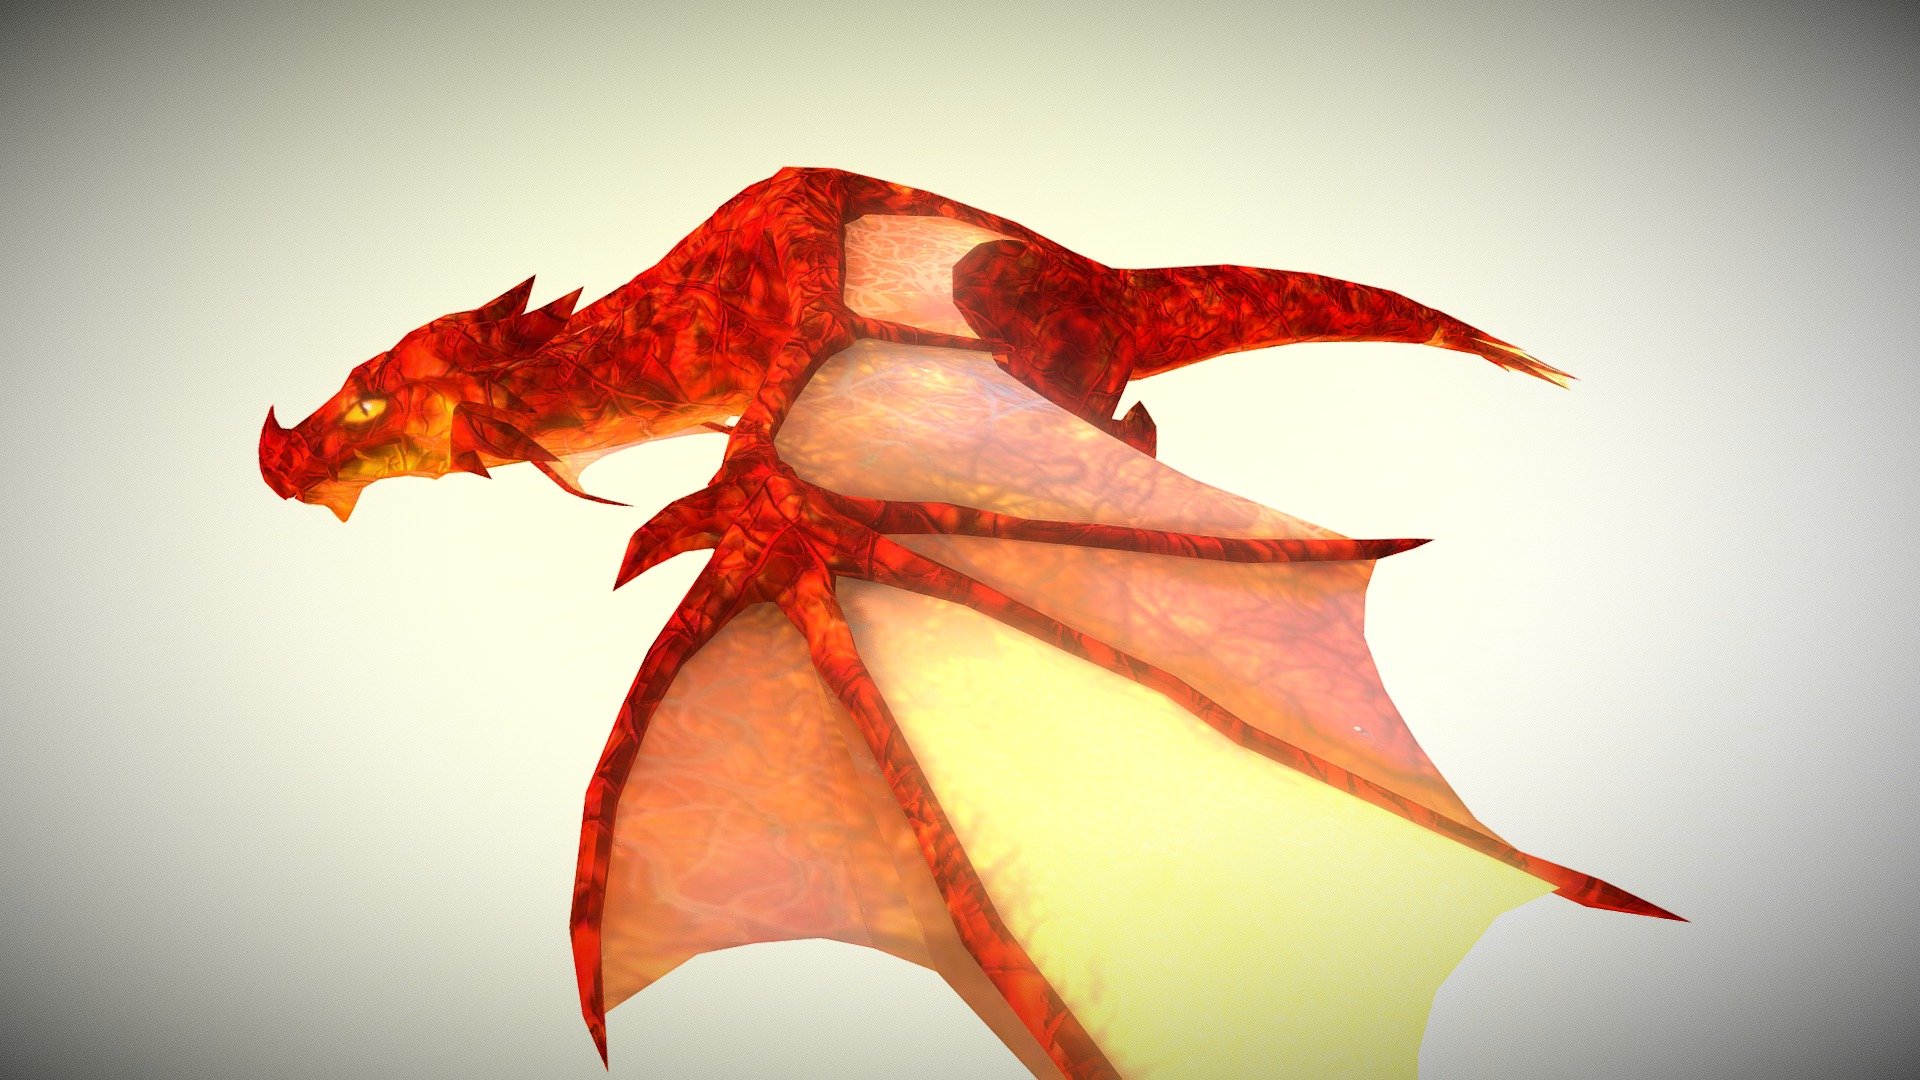 Low poly red dragon with some animations.
Original made in blender but this one is .fbx.
For the textures we have 5 different albedo options + nortmal maps + mettalics + Roughness 3d model